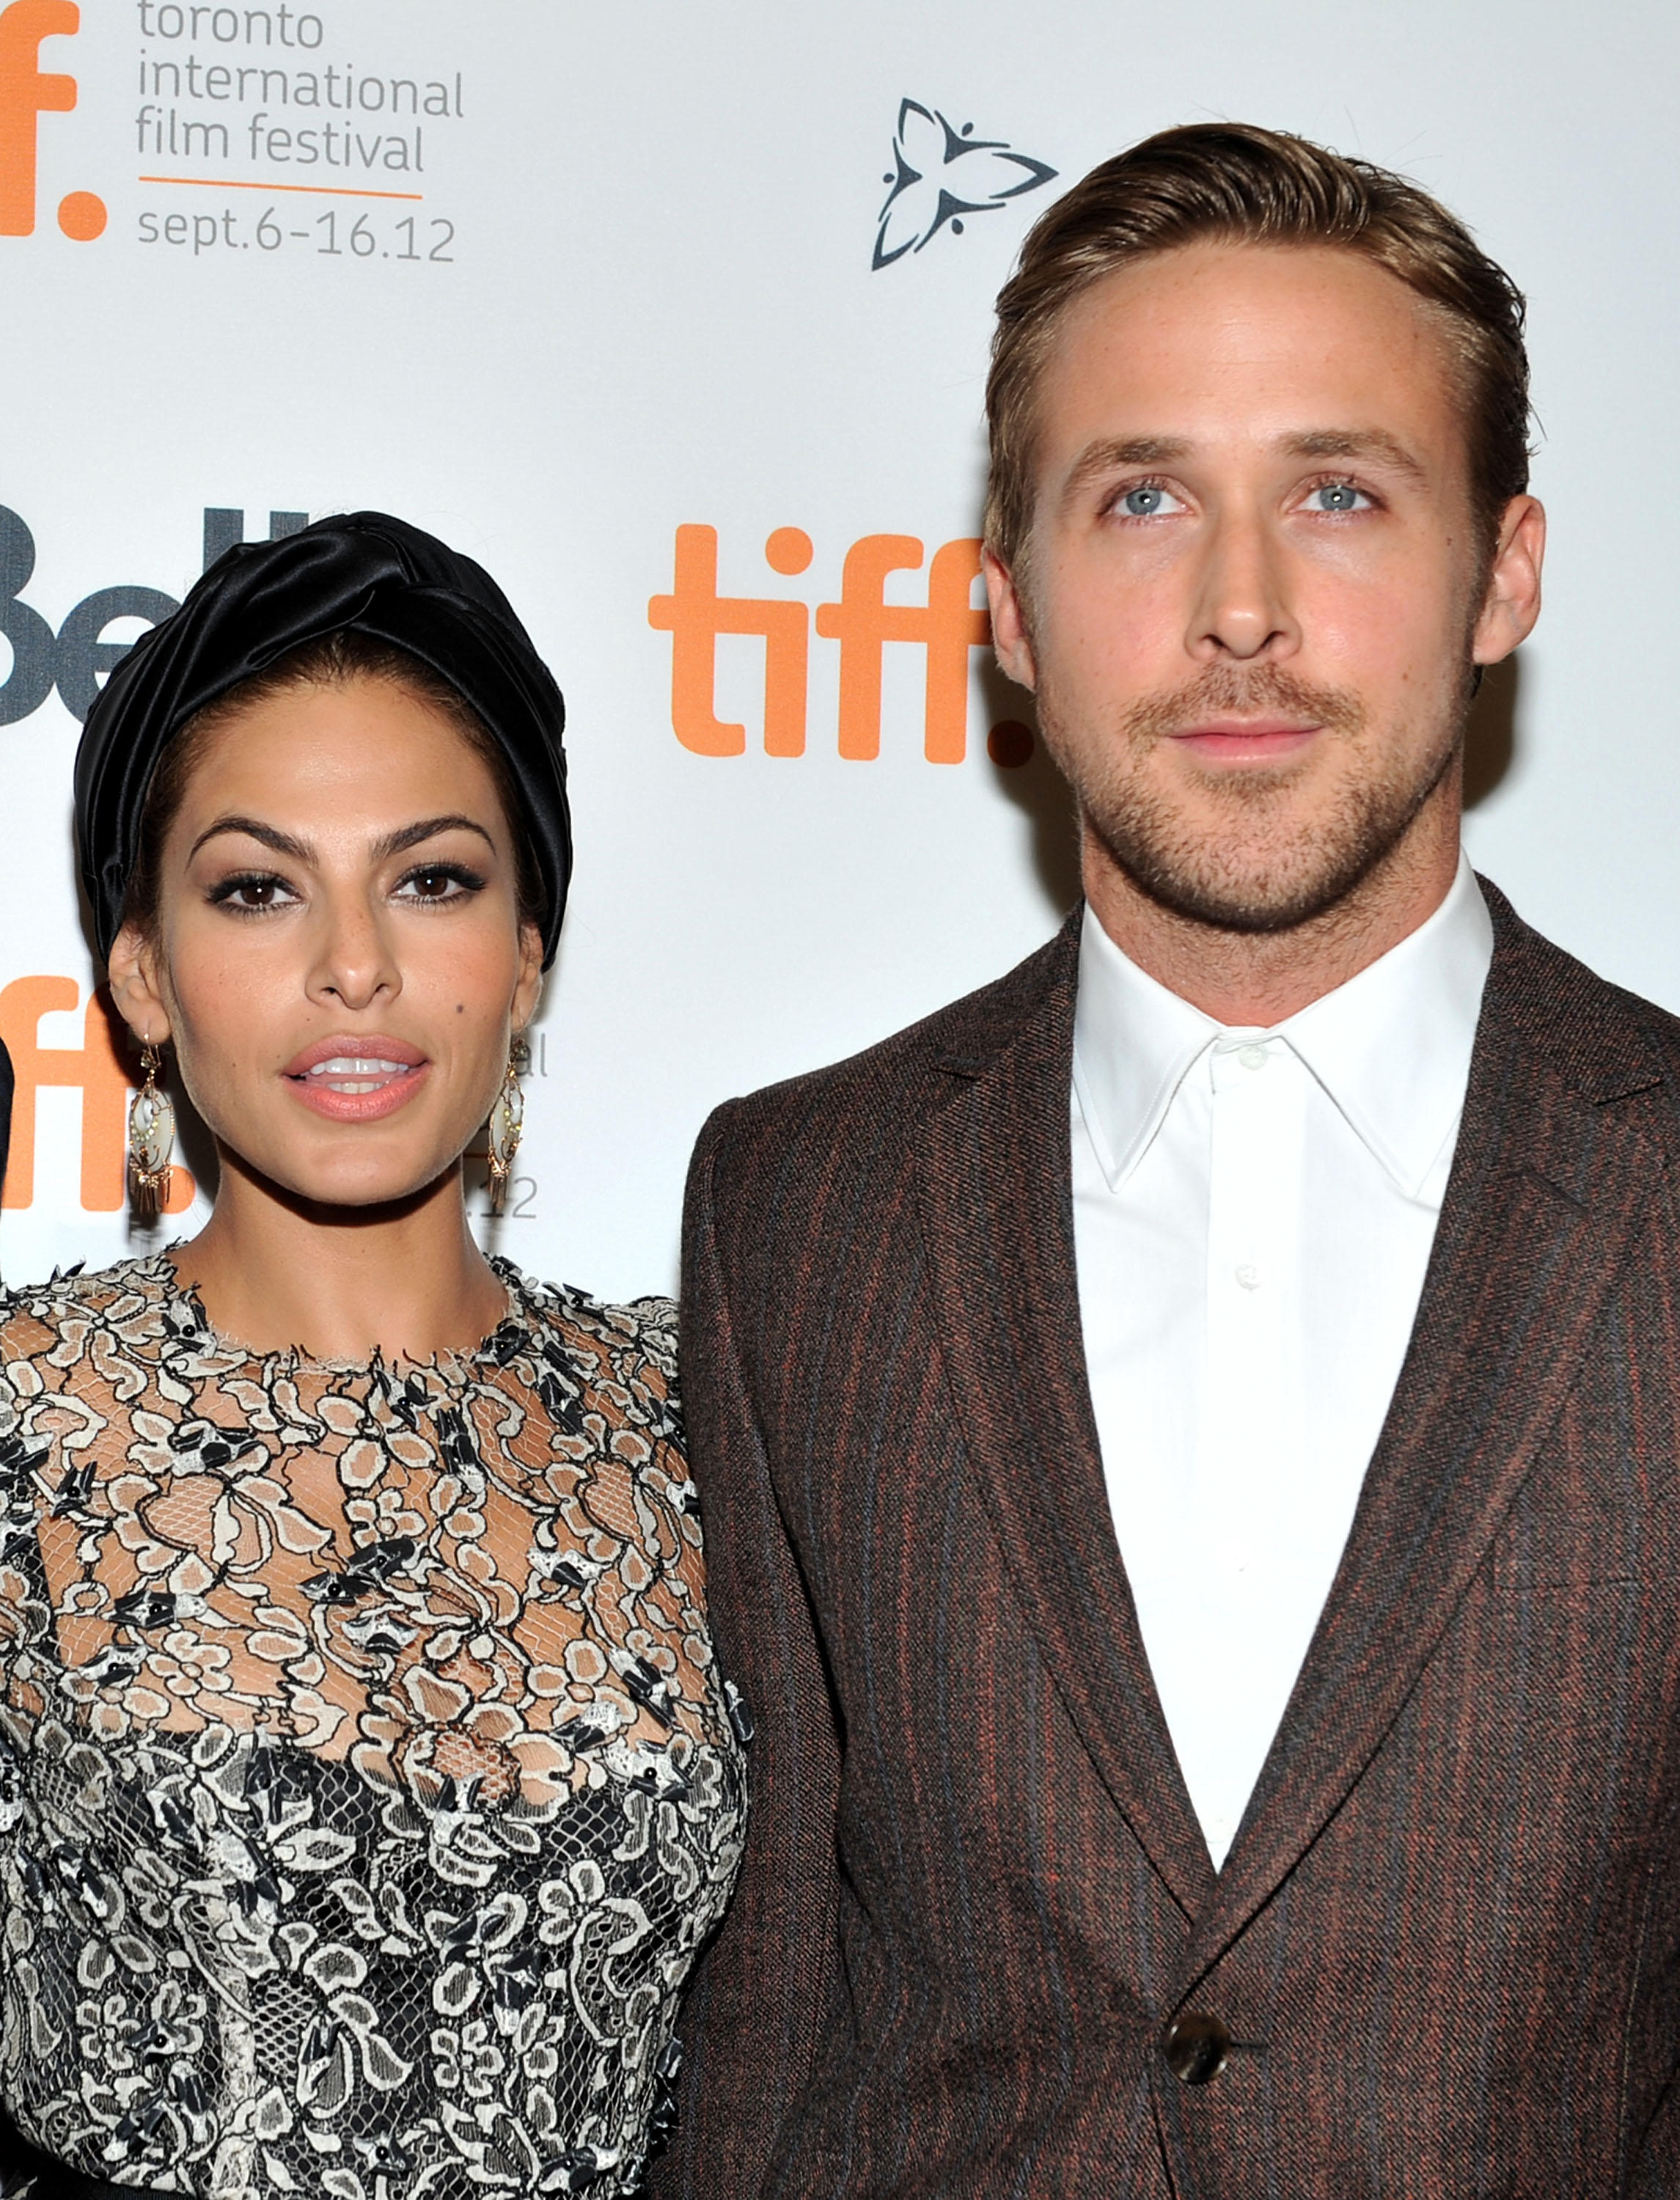 Ryan Gosling and Eva Mendes walked a very rare red carpet together in 2012 after they first started dating